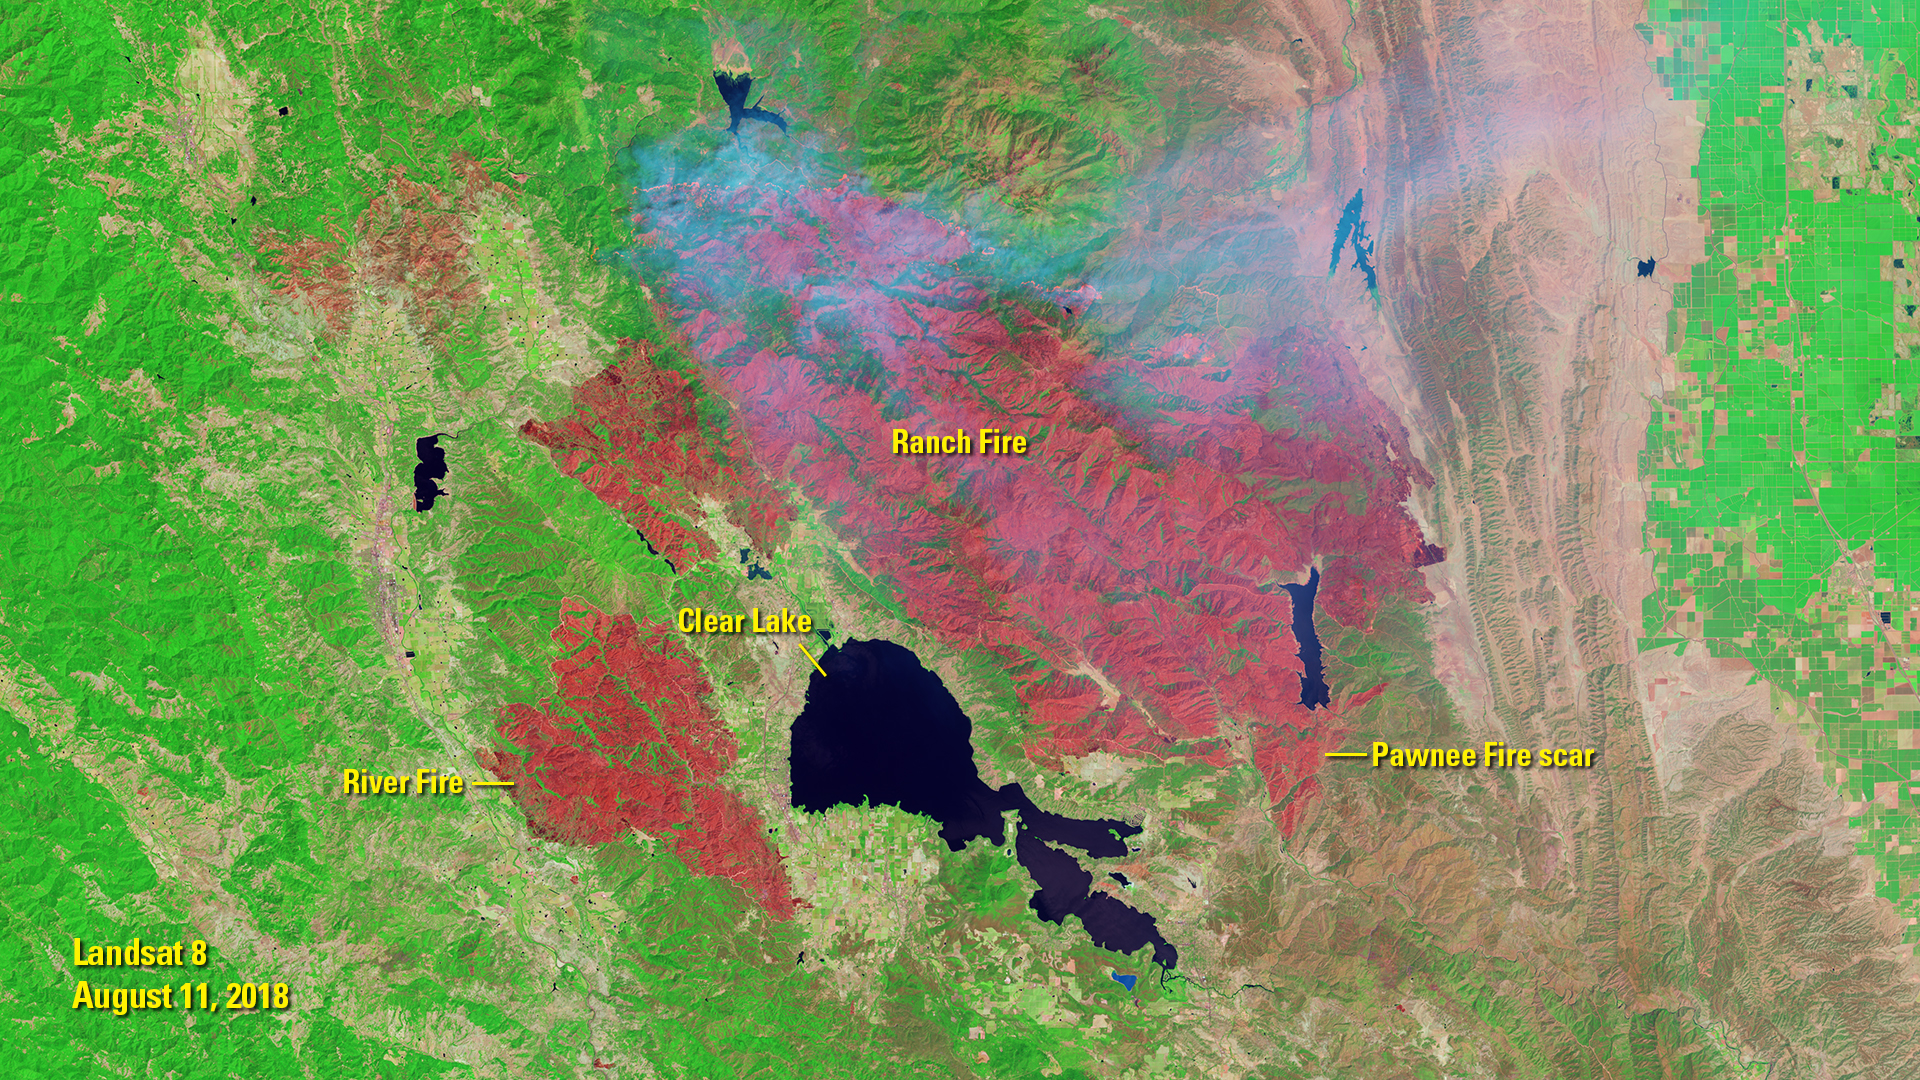 Landsat satellite image captured after the spread of the Mendicino Fire